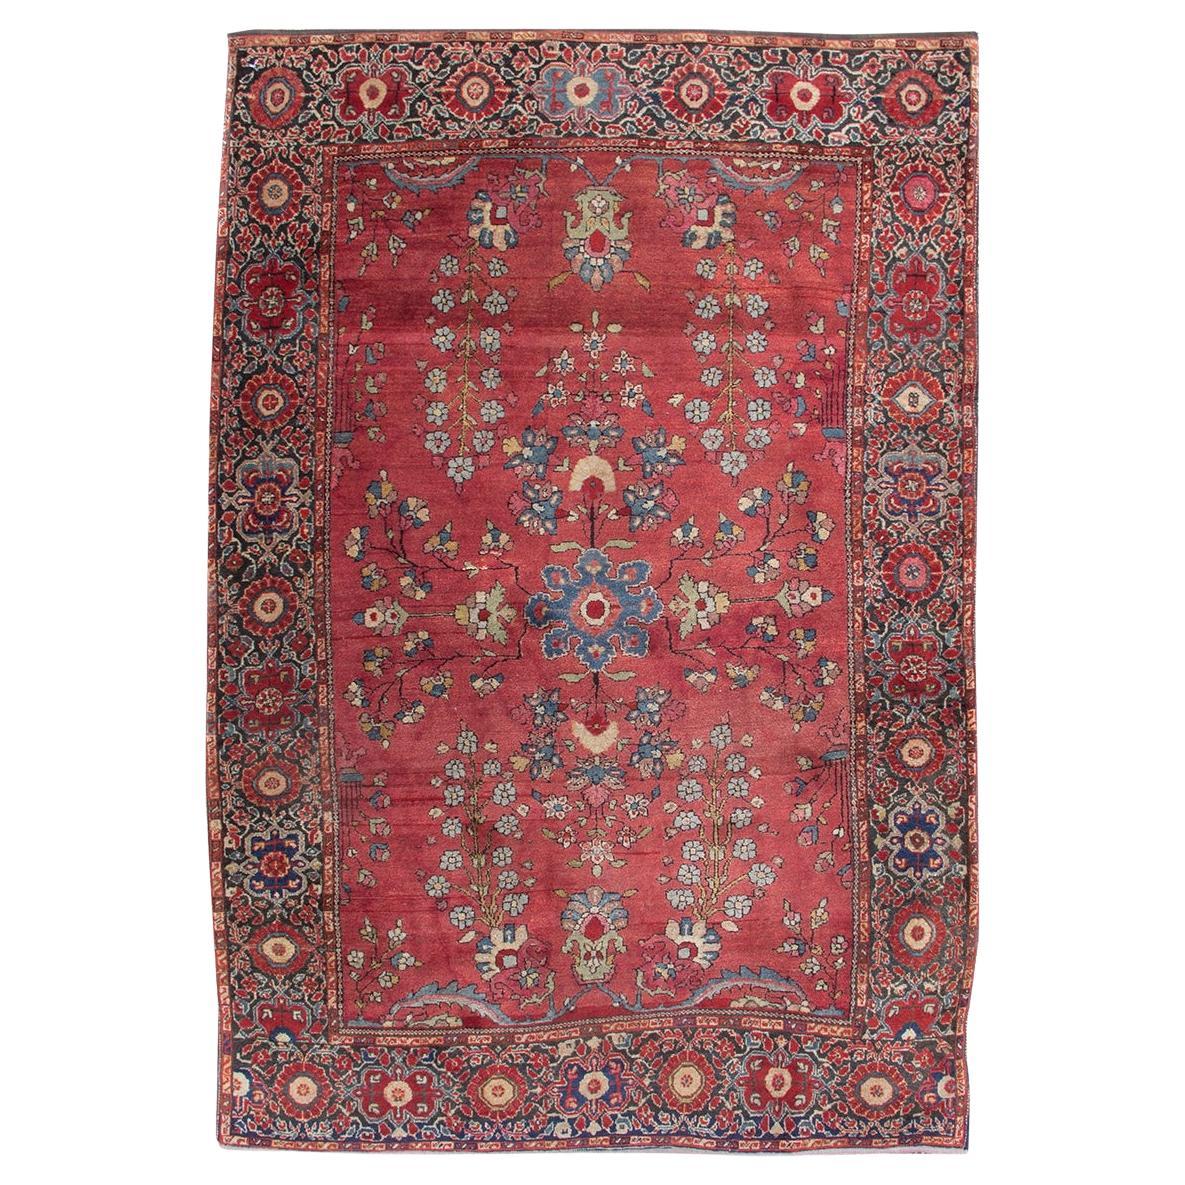 Antique Persian Fereghan Sarouk Rug, Early 20th Century